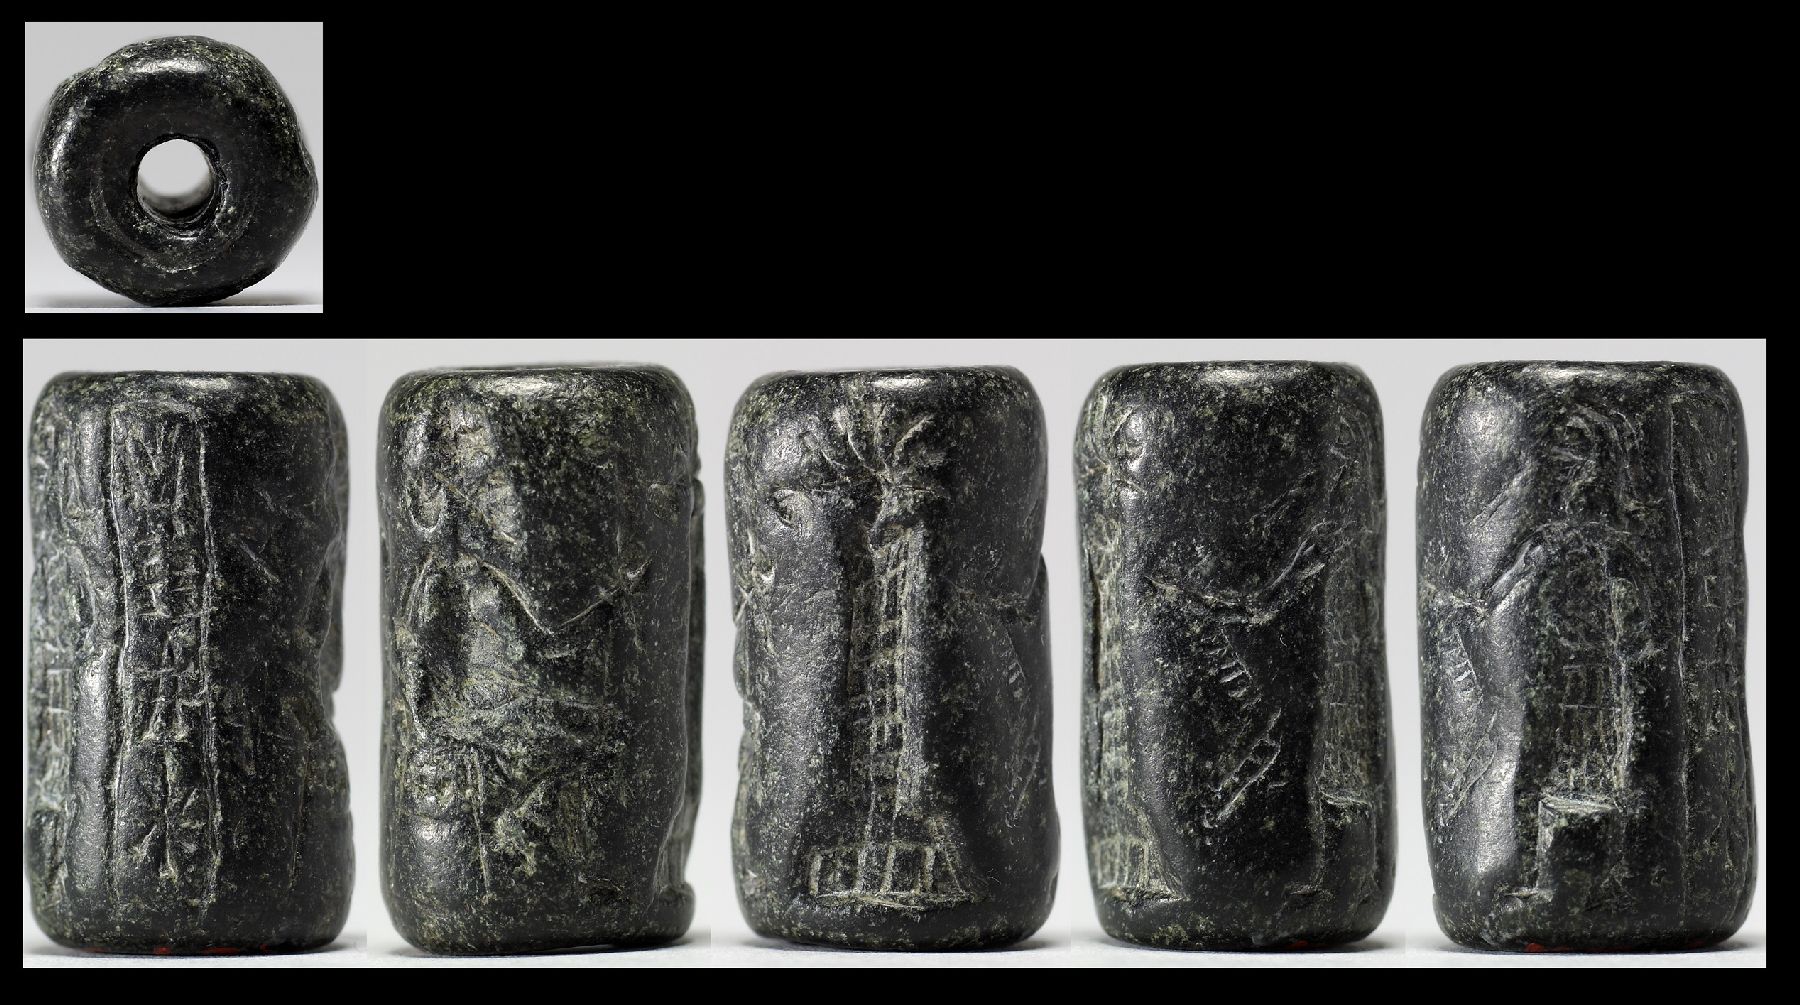 Image for Cylinder Seal with a  Presentation Scene and an Inscription